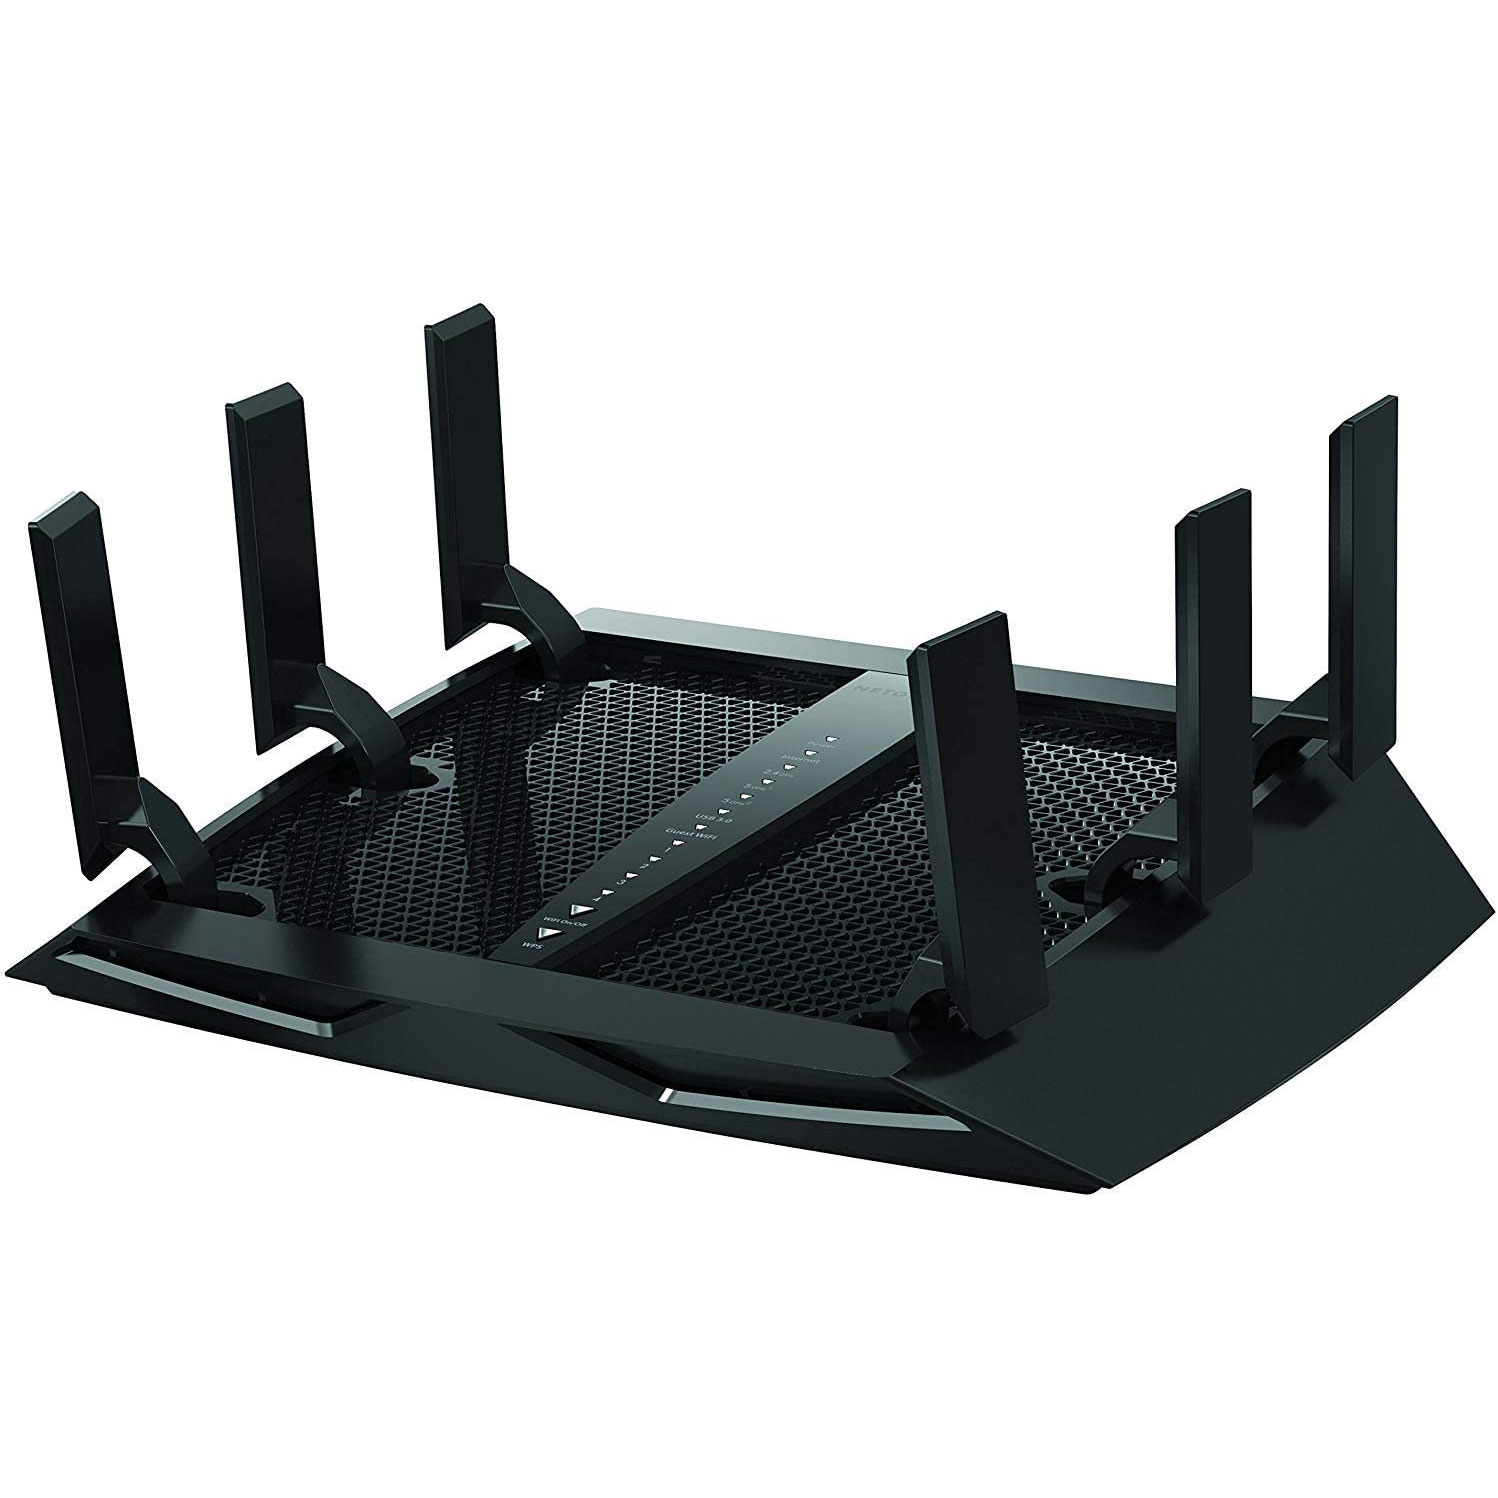 NETGEAR Nighthawk X6S R7900P Tri-Band WiFi Router (up to 3Gbps